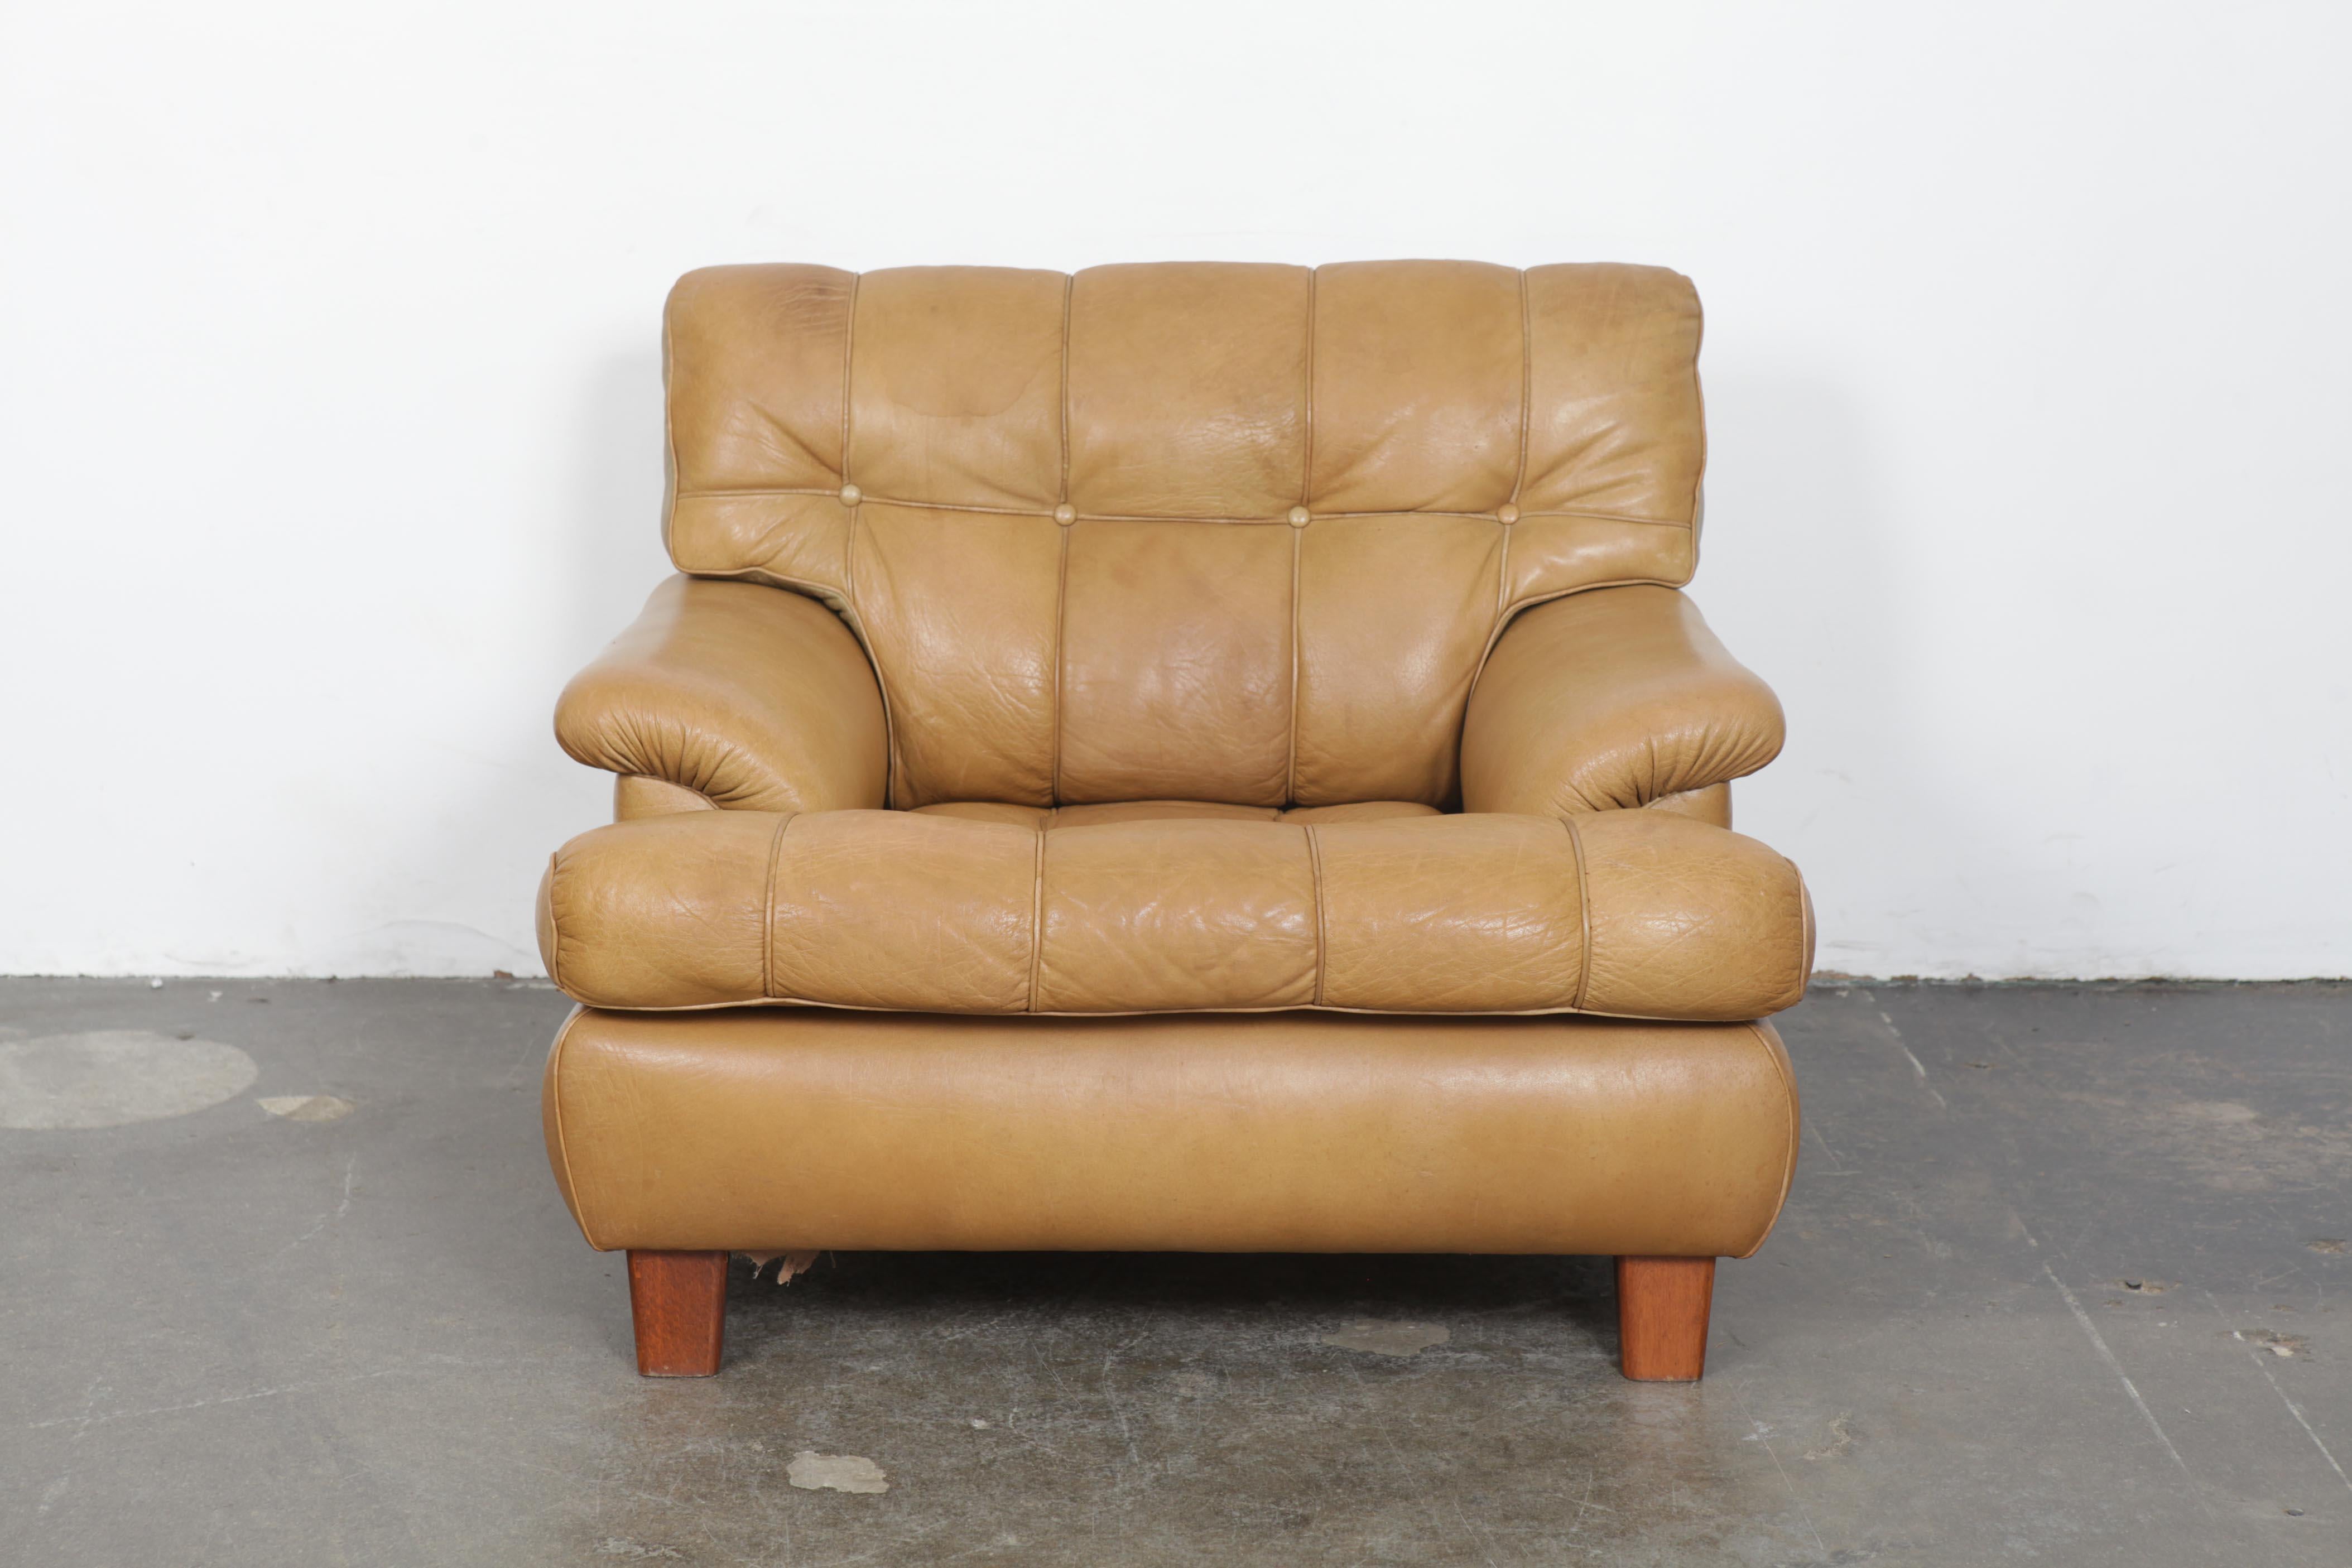 Arne Norell designed tufted lounge chair in original tan buffalo leather, produced by Norell AB, Sweden. Very similar in style to the Merkur chair but with a more rounded form overall. No damage to the leather in terms of rips, tears or punctures.